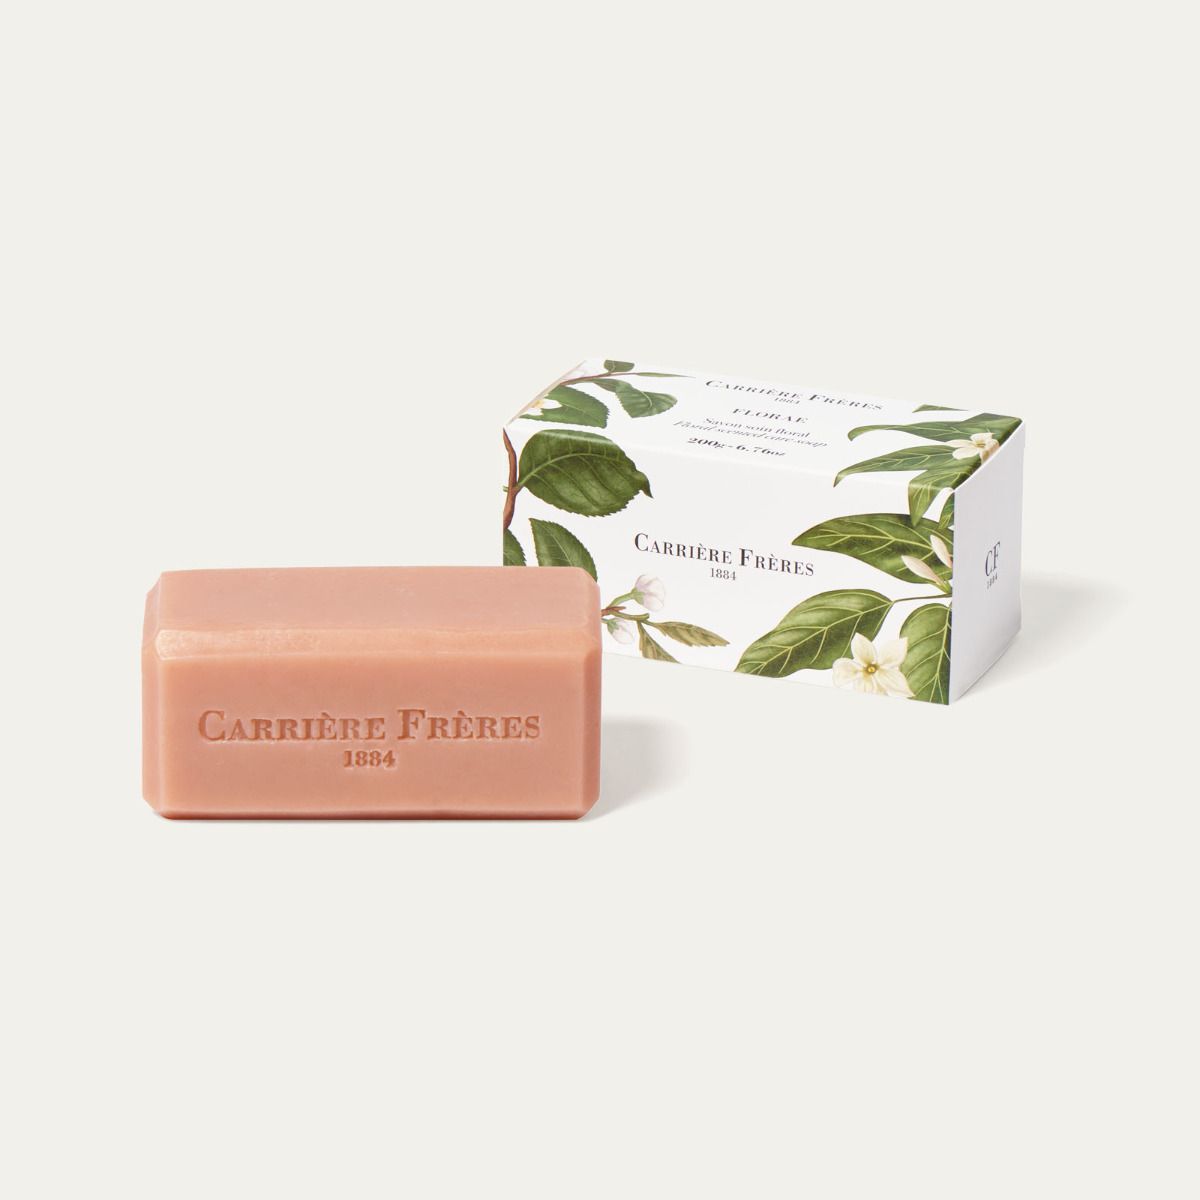 Body Solid Soap Florae